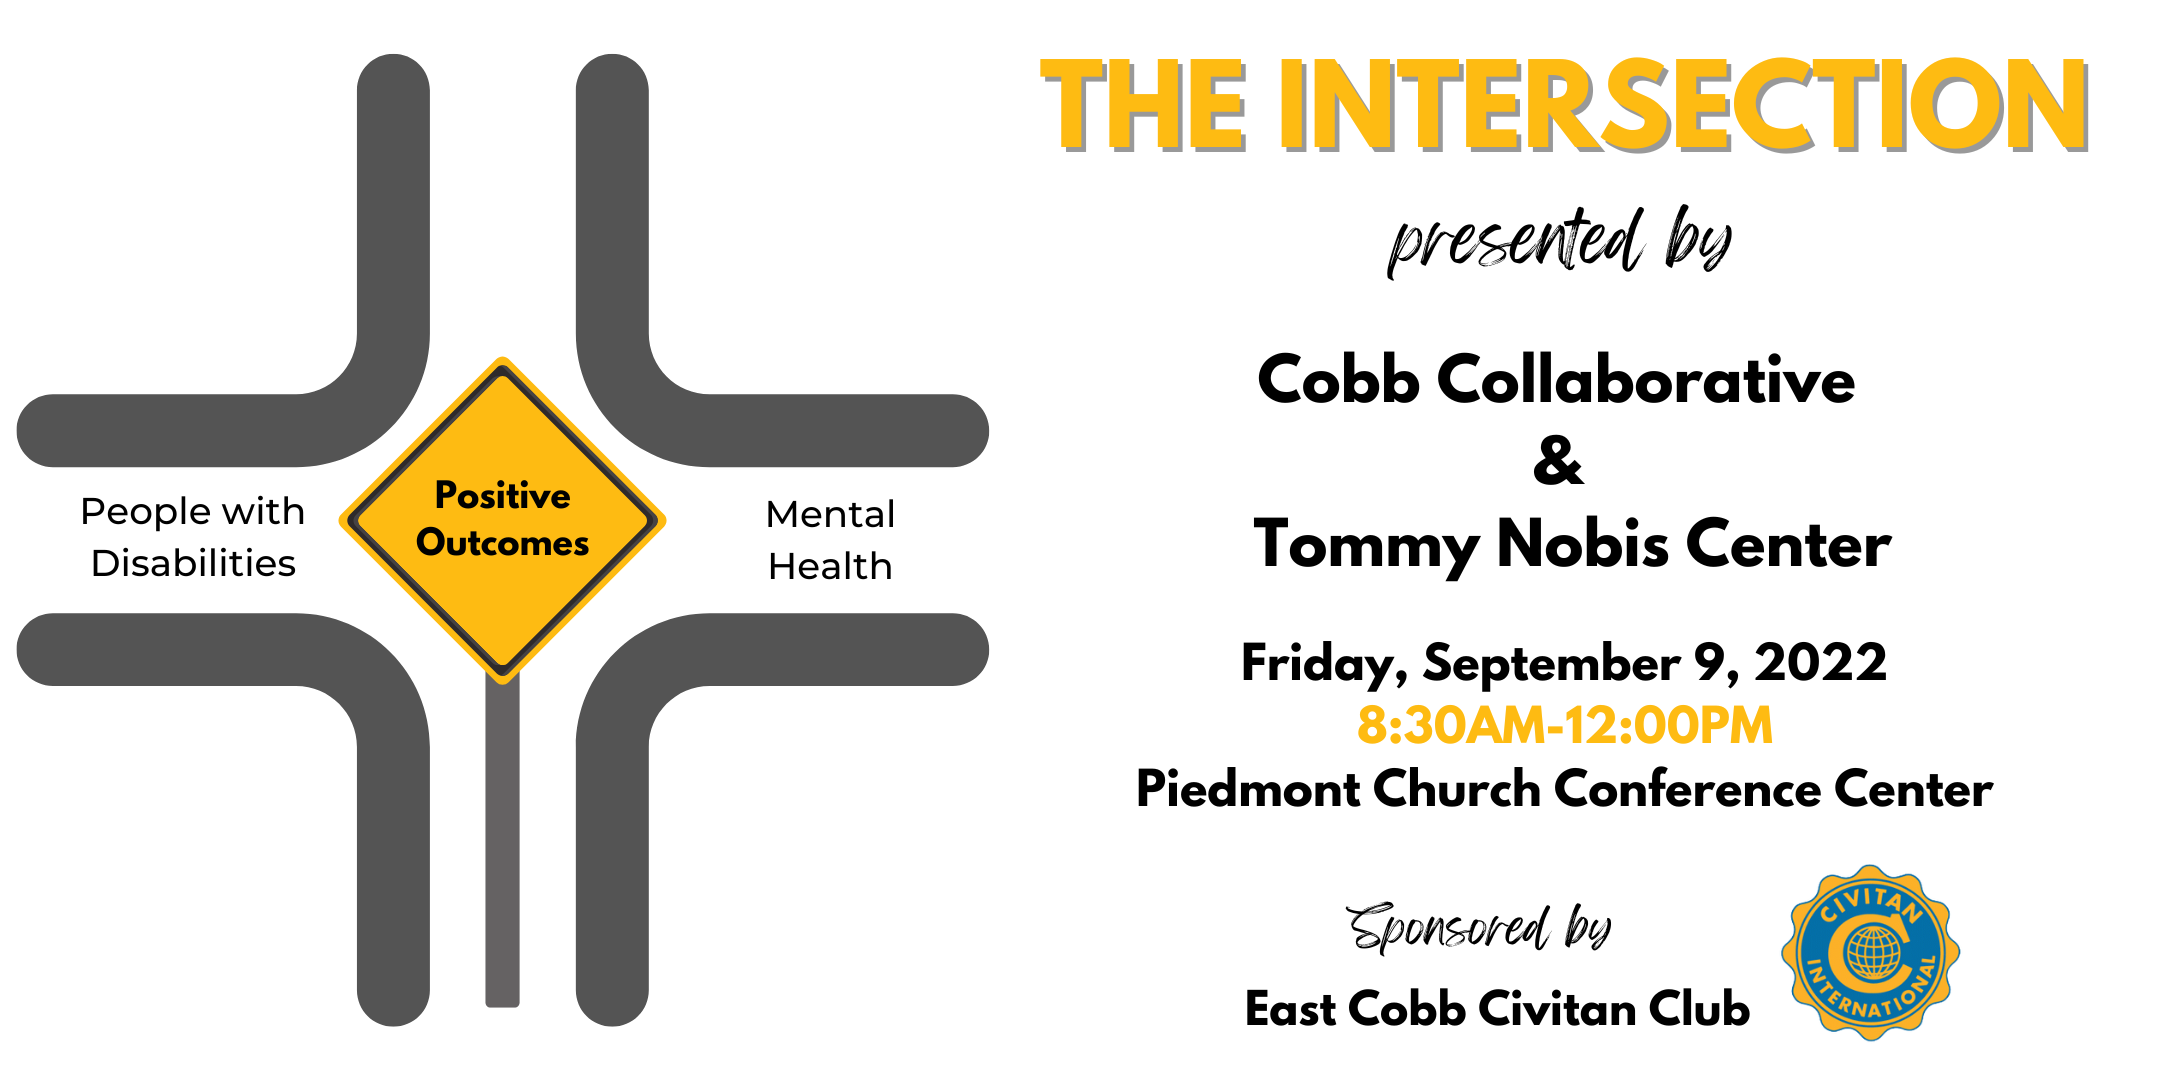 The Intersection - Presented by Cobb Collaborative & Tommy Nobis Center